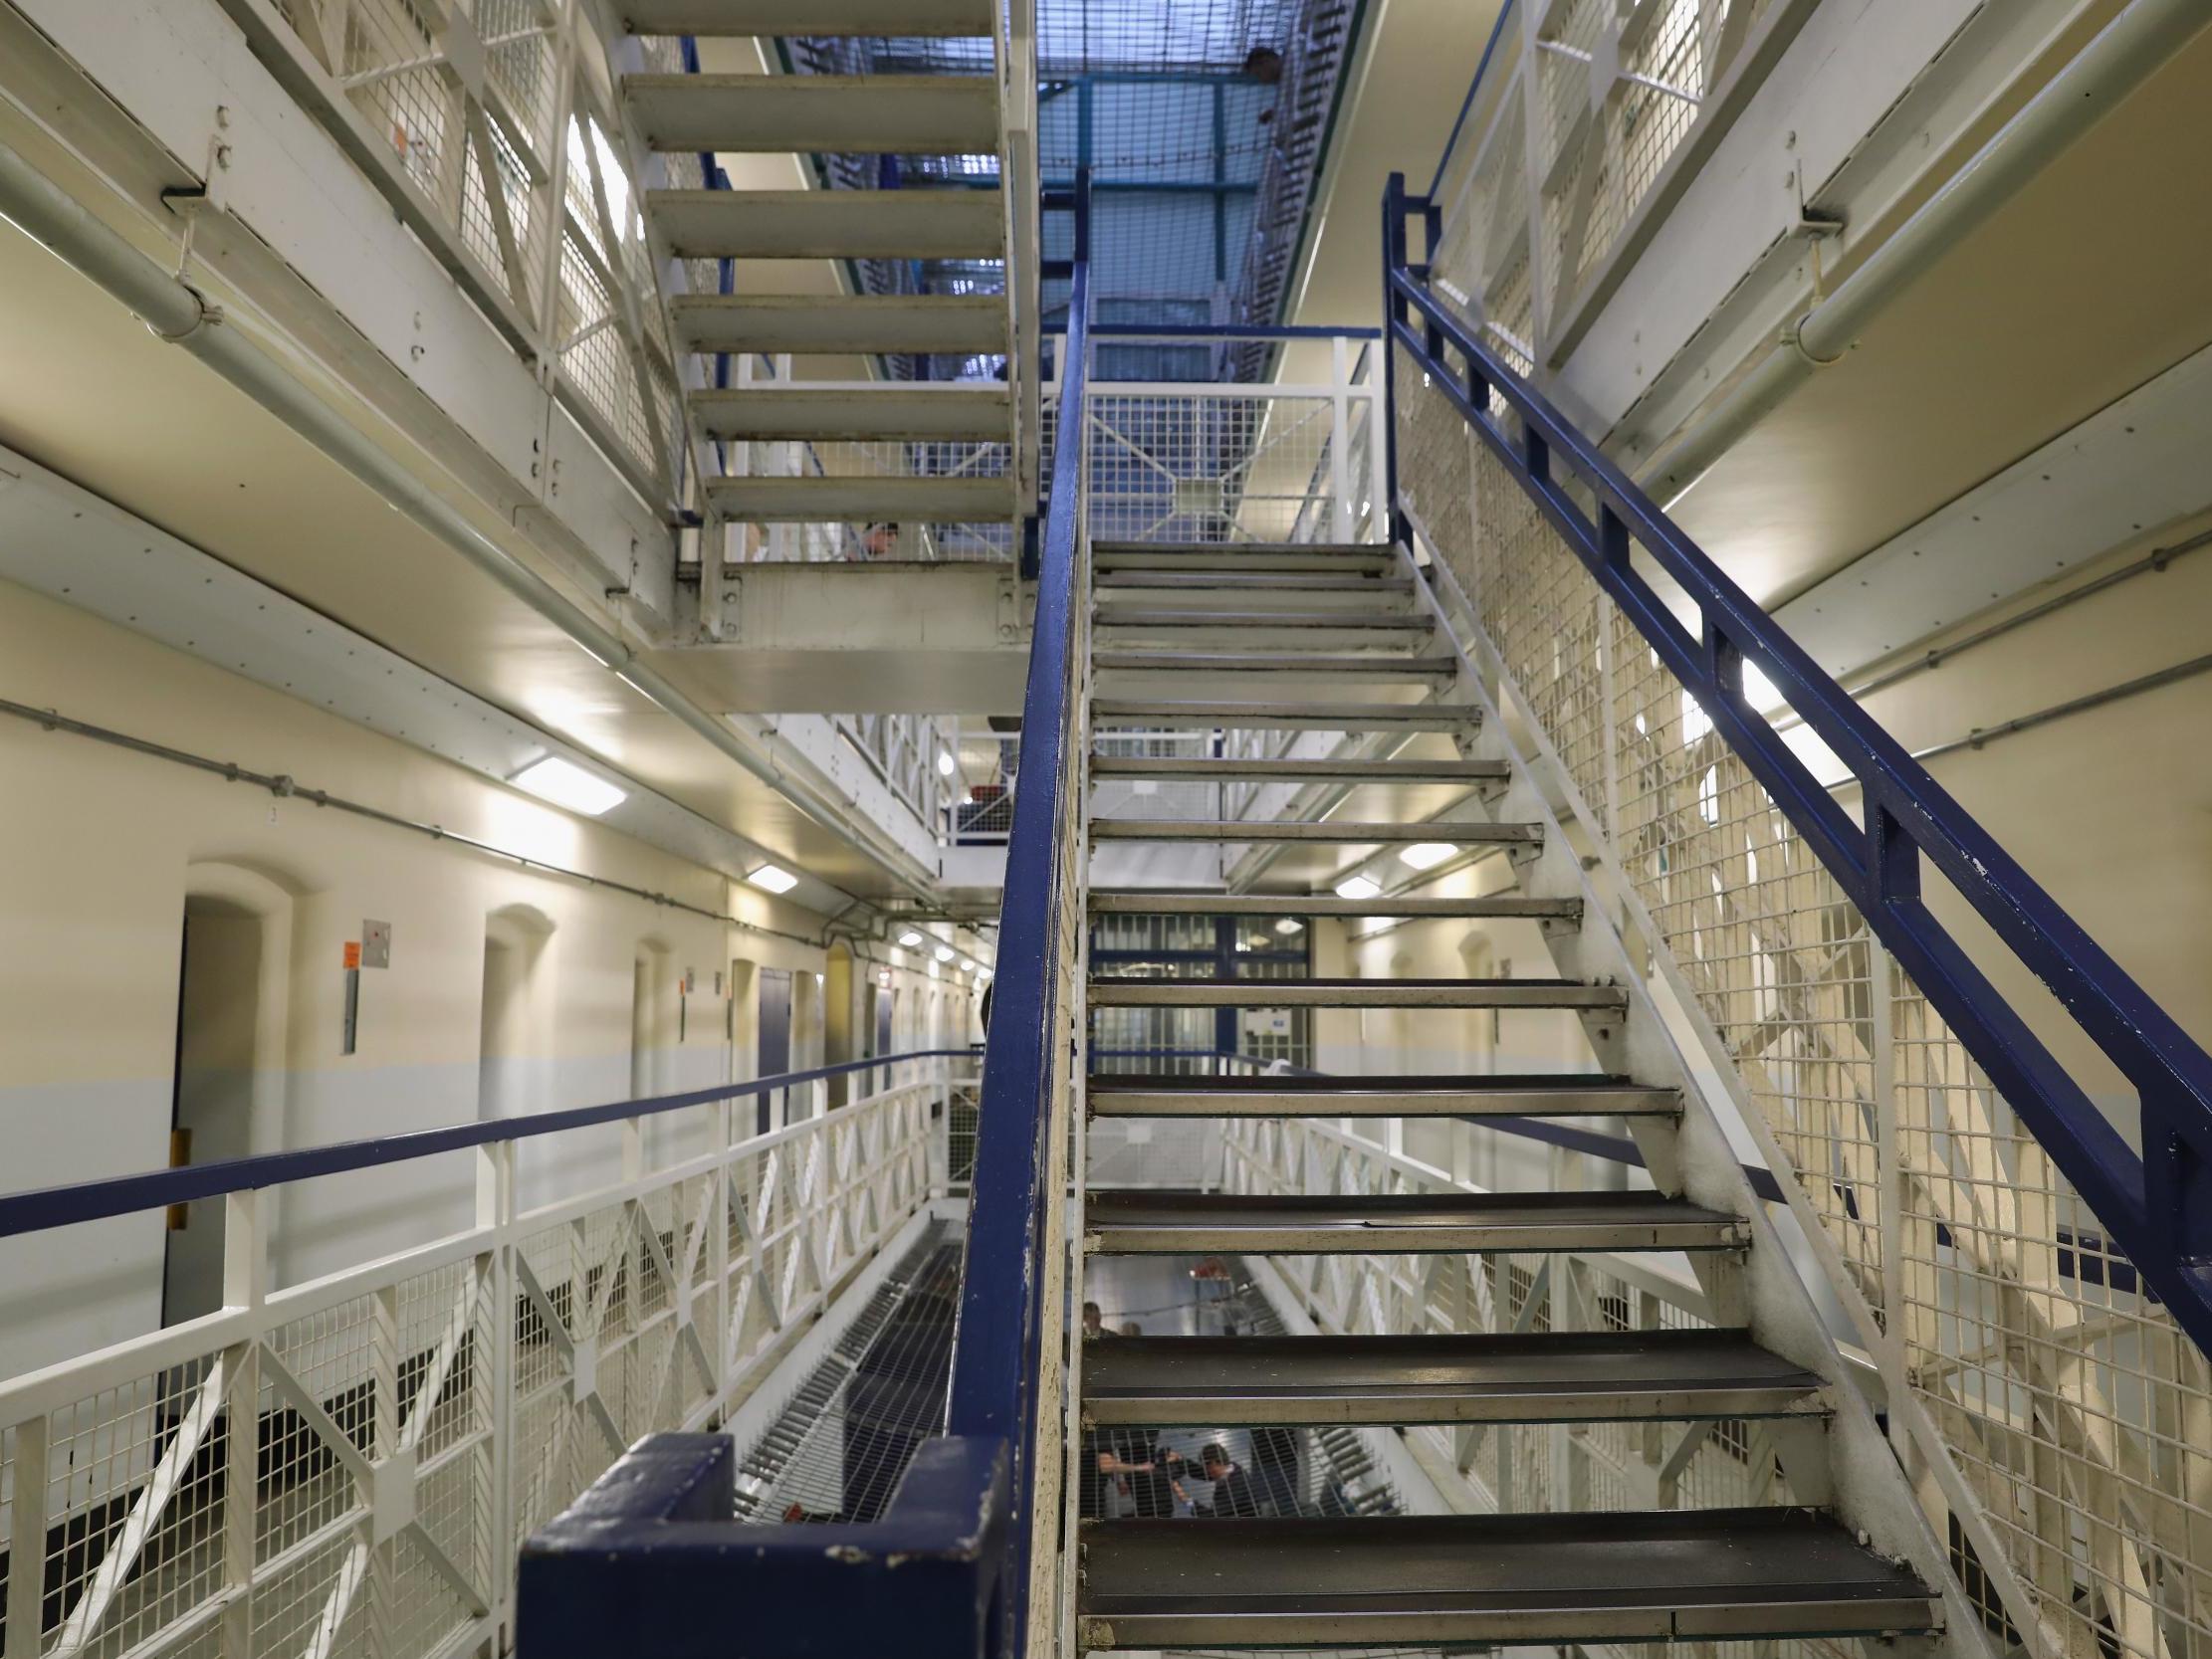 A general view inside HMP Brixton, which has joined up with Fulham as part of the Twinning Project